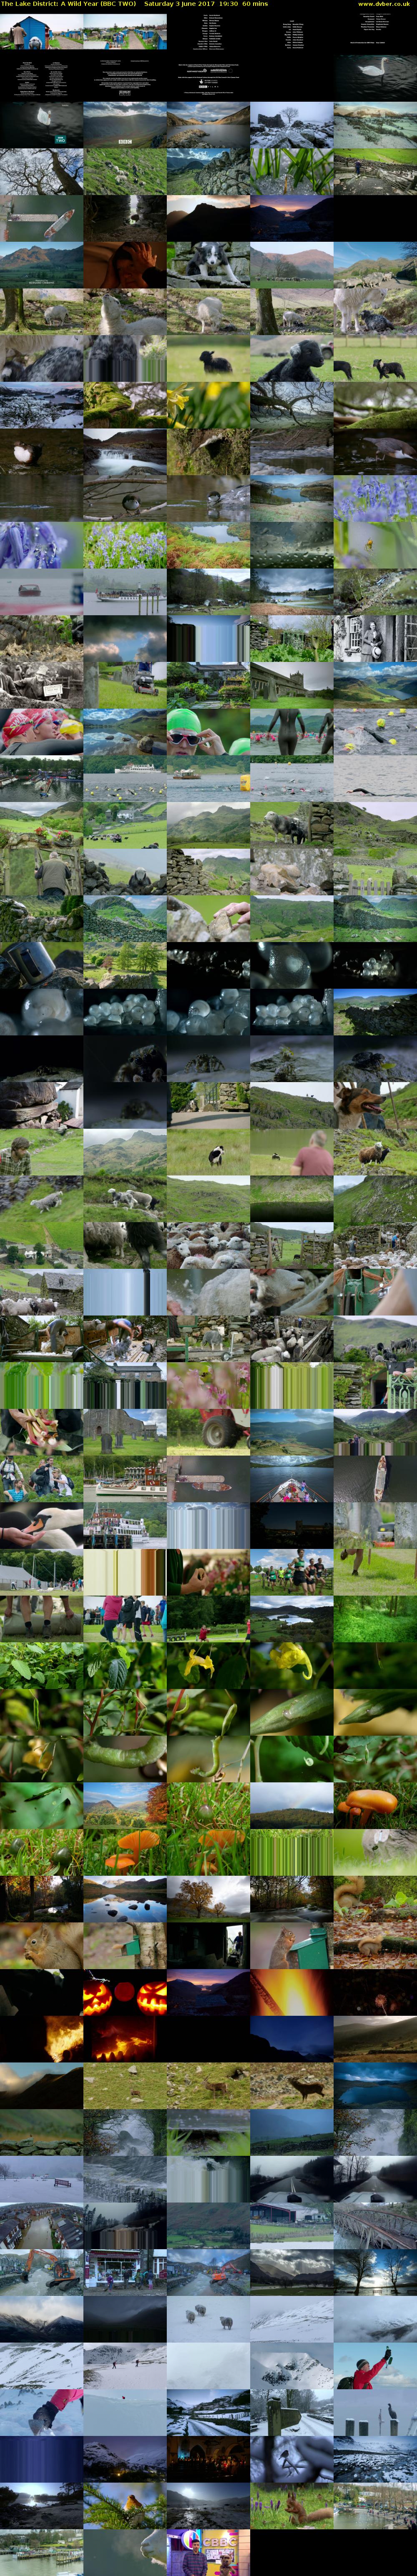 The Lake District: A Wild Year (BBC TWO) Saturday 3 June 2017 19:30 - 20:30